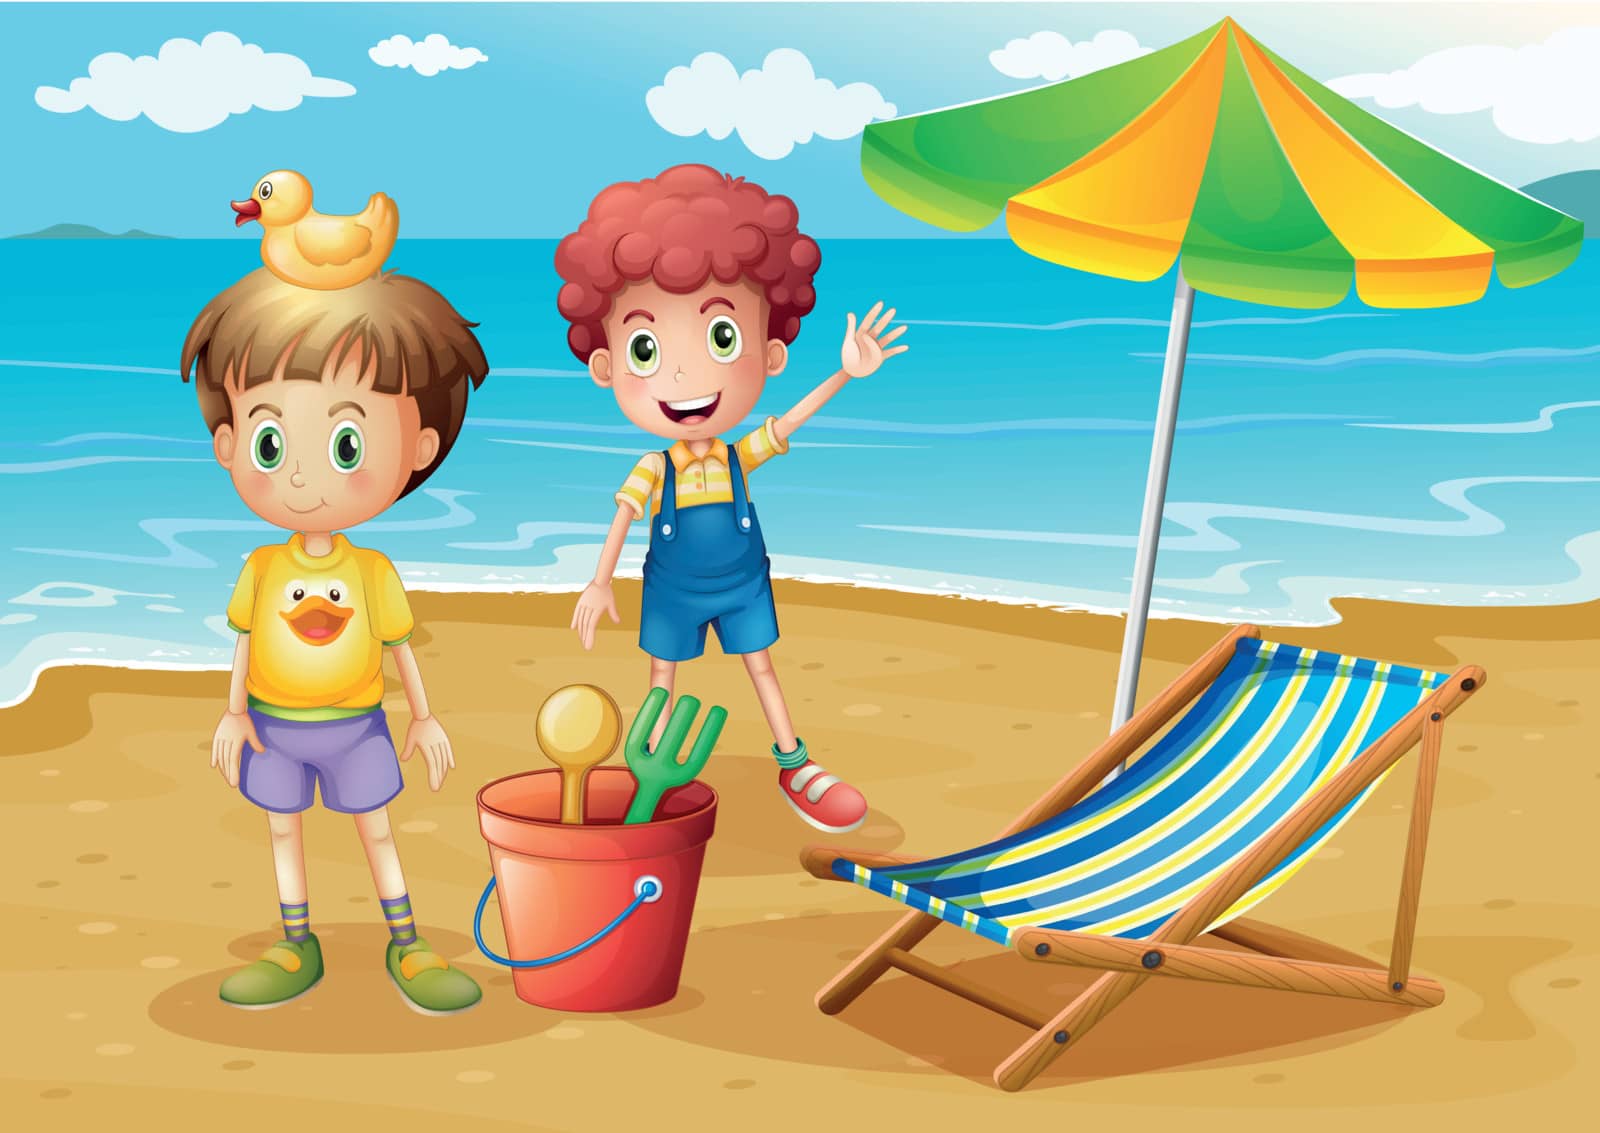 Illustration of the kids at the beach with an umbrella and a foldable bed